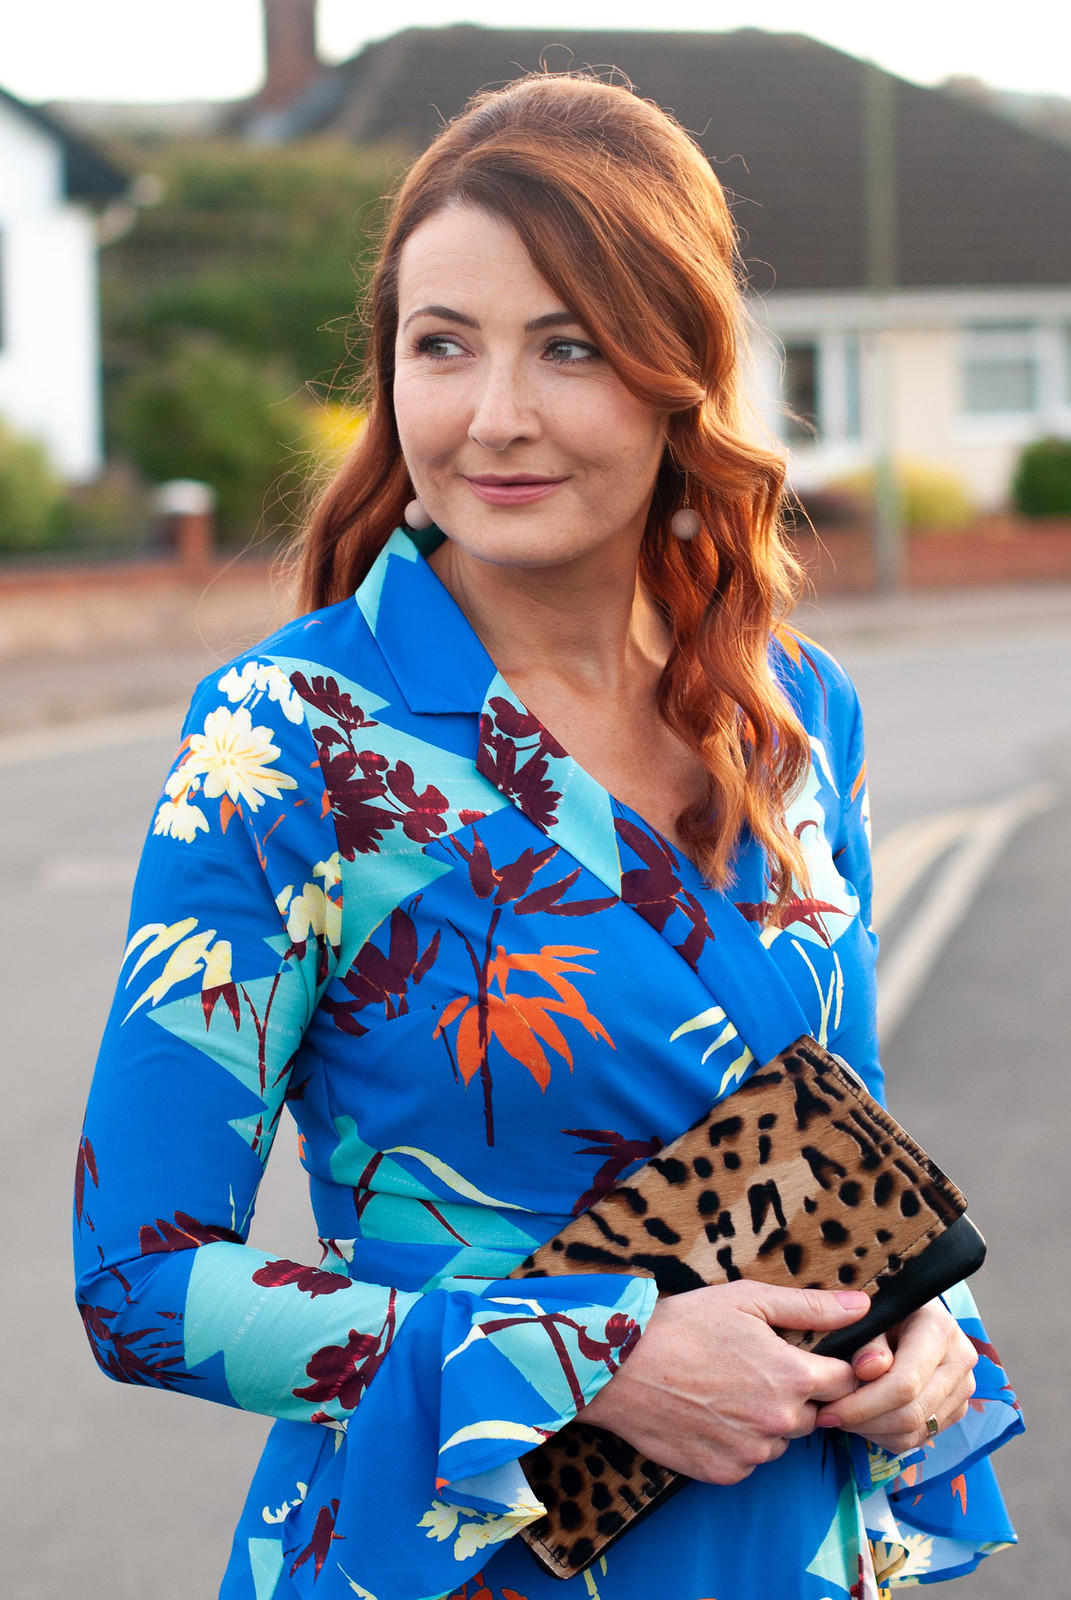 What to Wear to a Wedding Reception as an Evening Guest: A mixed pattern dress in floral and leopard print, Rixo London style | Not Dressed As Lamb, what to wear over 40